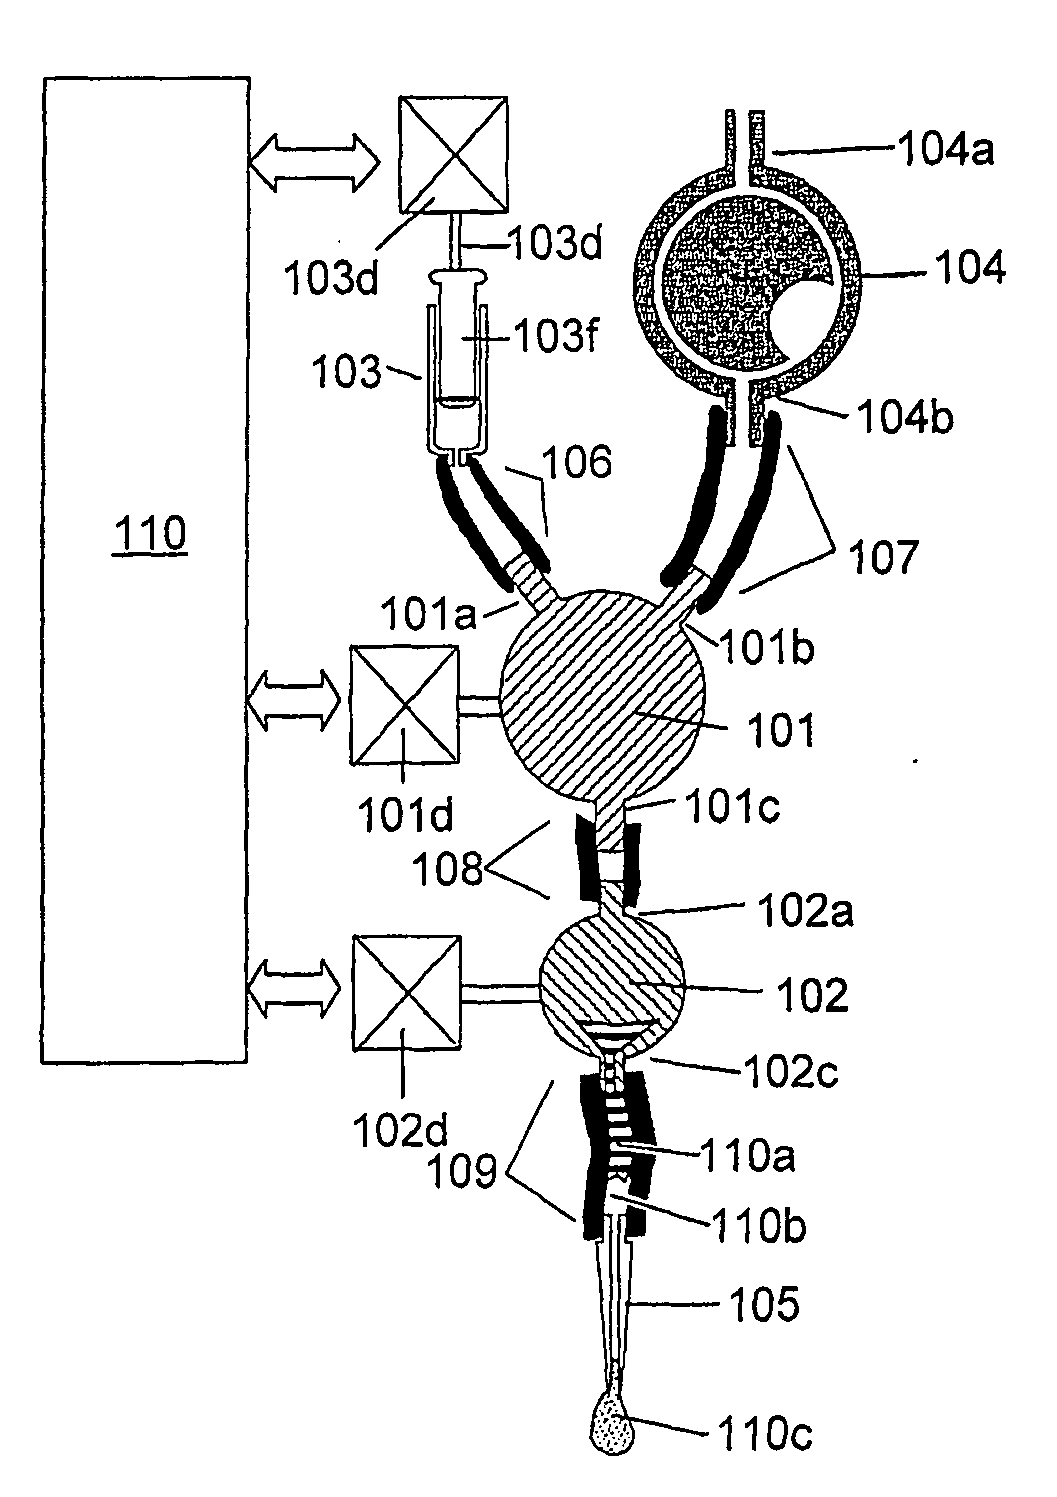 Microvalve Controlled Precision Fluid Dispensing Apparatus with a Self-Purging Feature and Method for use